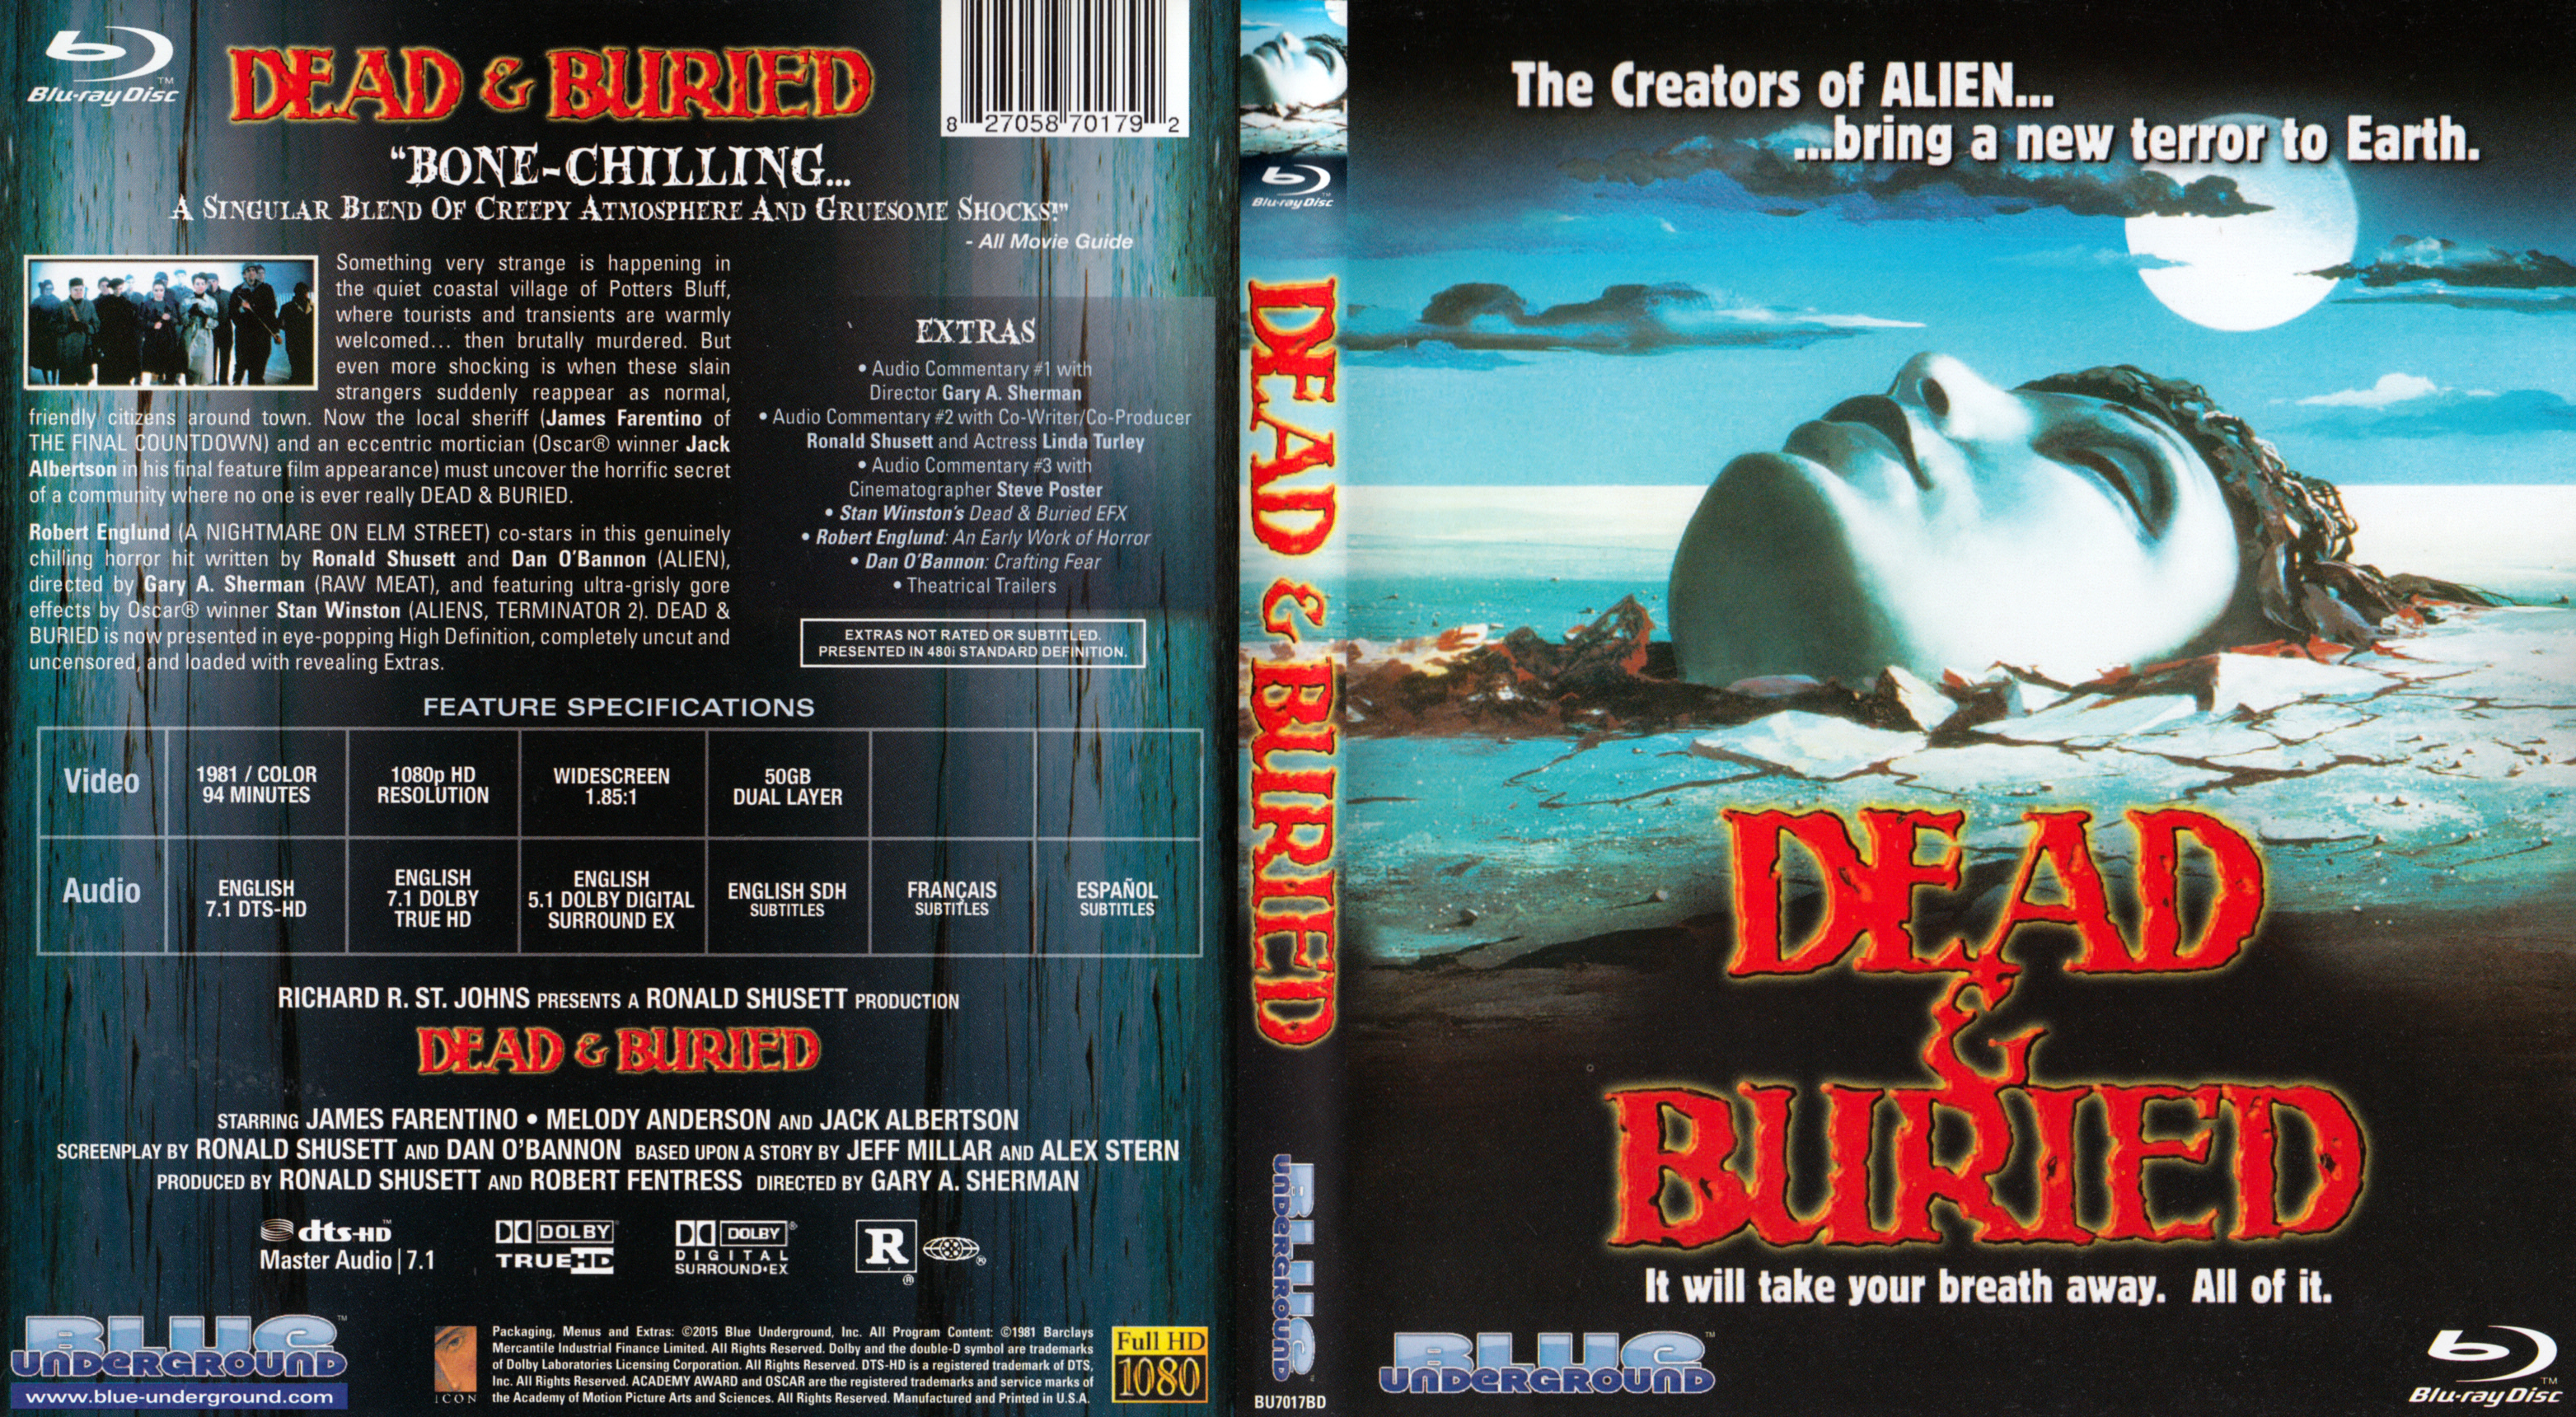 Jaquette DVD Dead & buried Zone 1 (BLU-RAY) v2